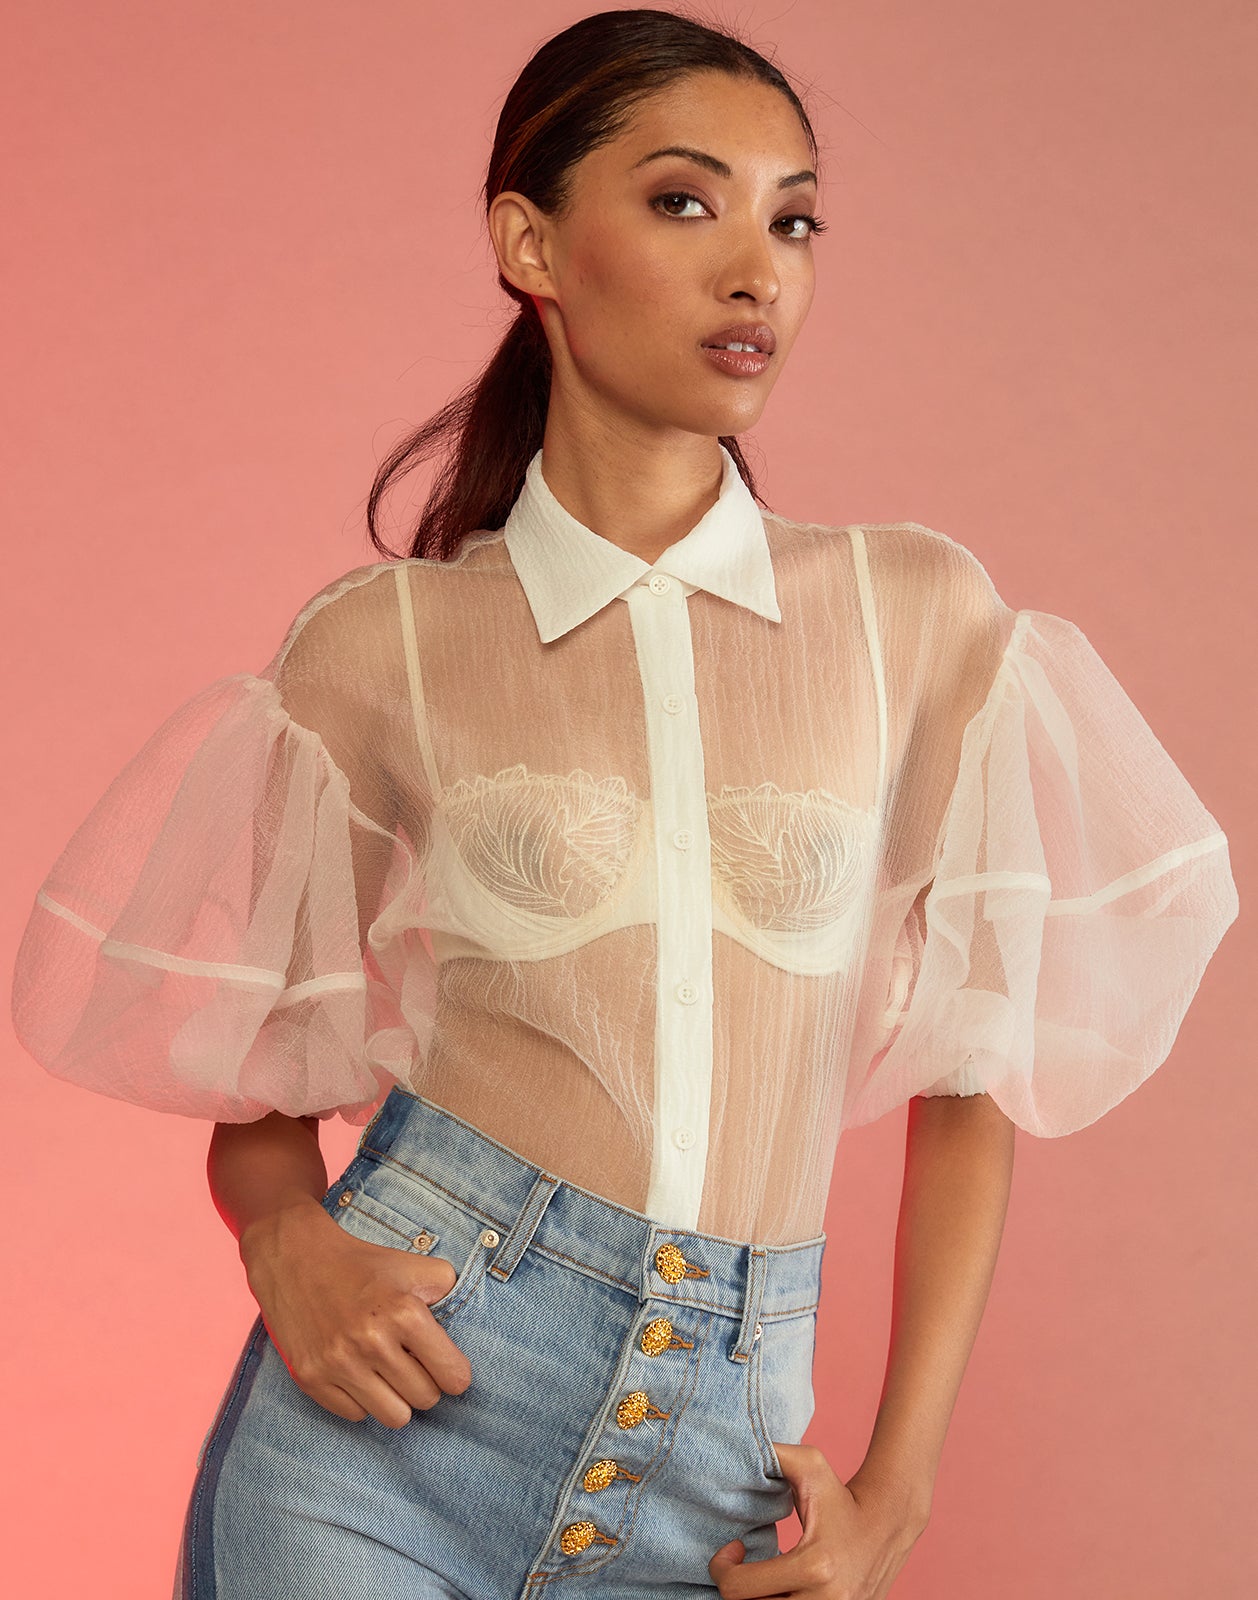 david rubinger recommends See Through Blouses Images